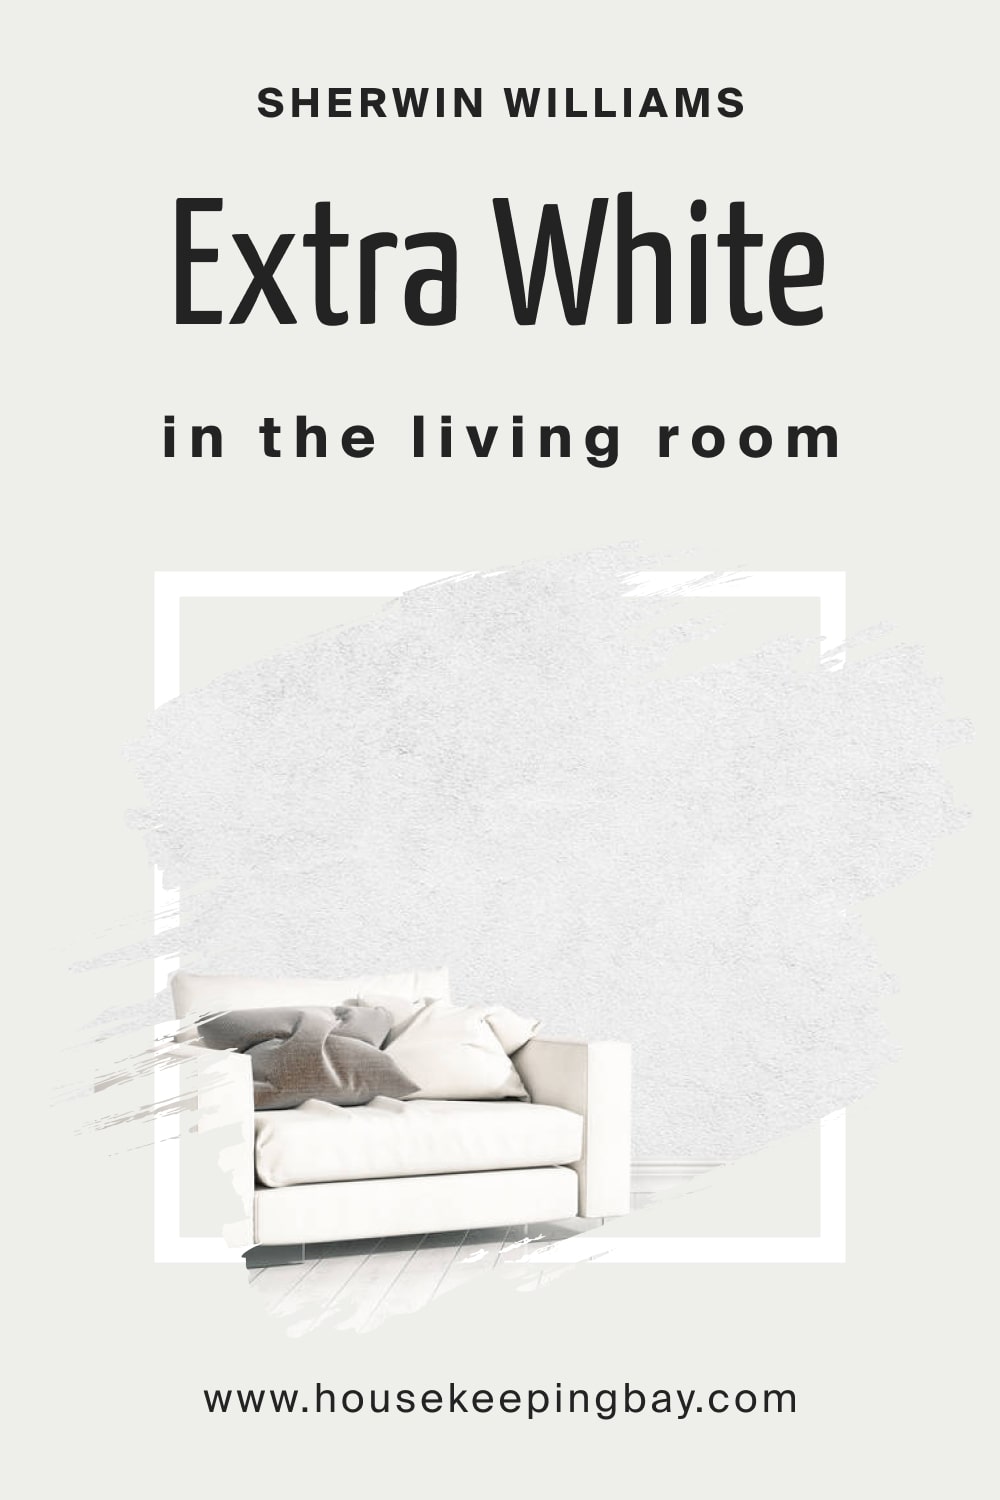 Sherwin Williams. Extra White SW 7006 In the Living Room